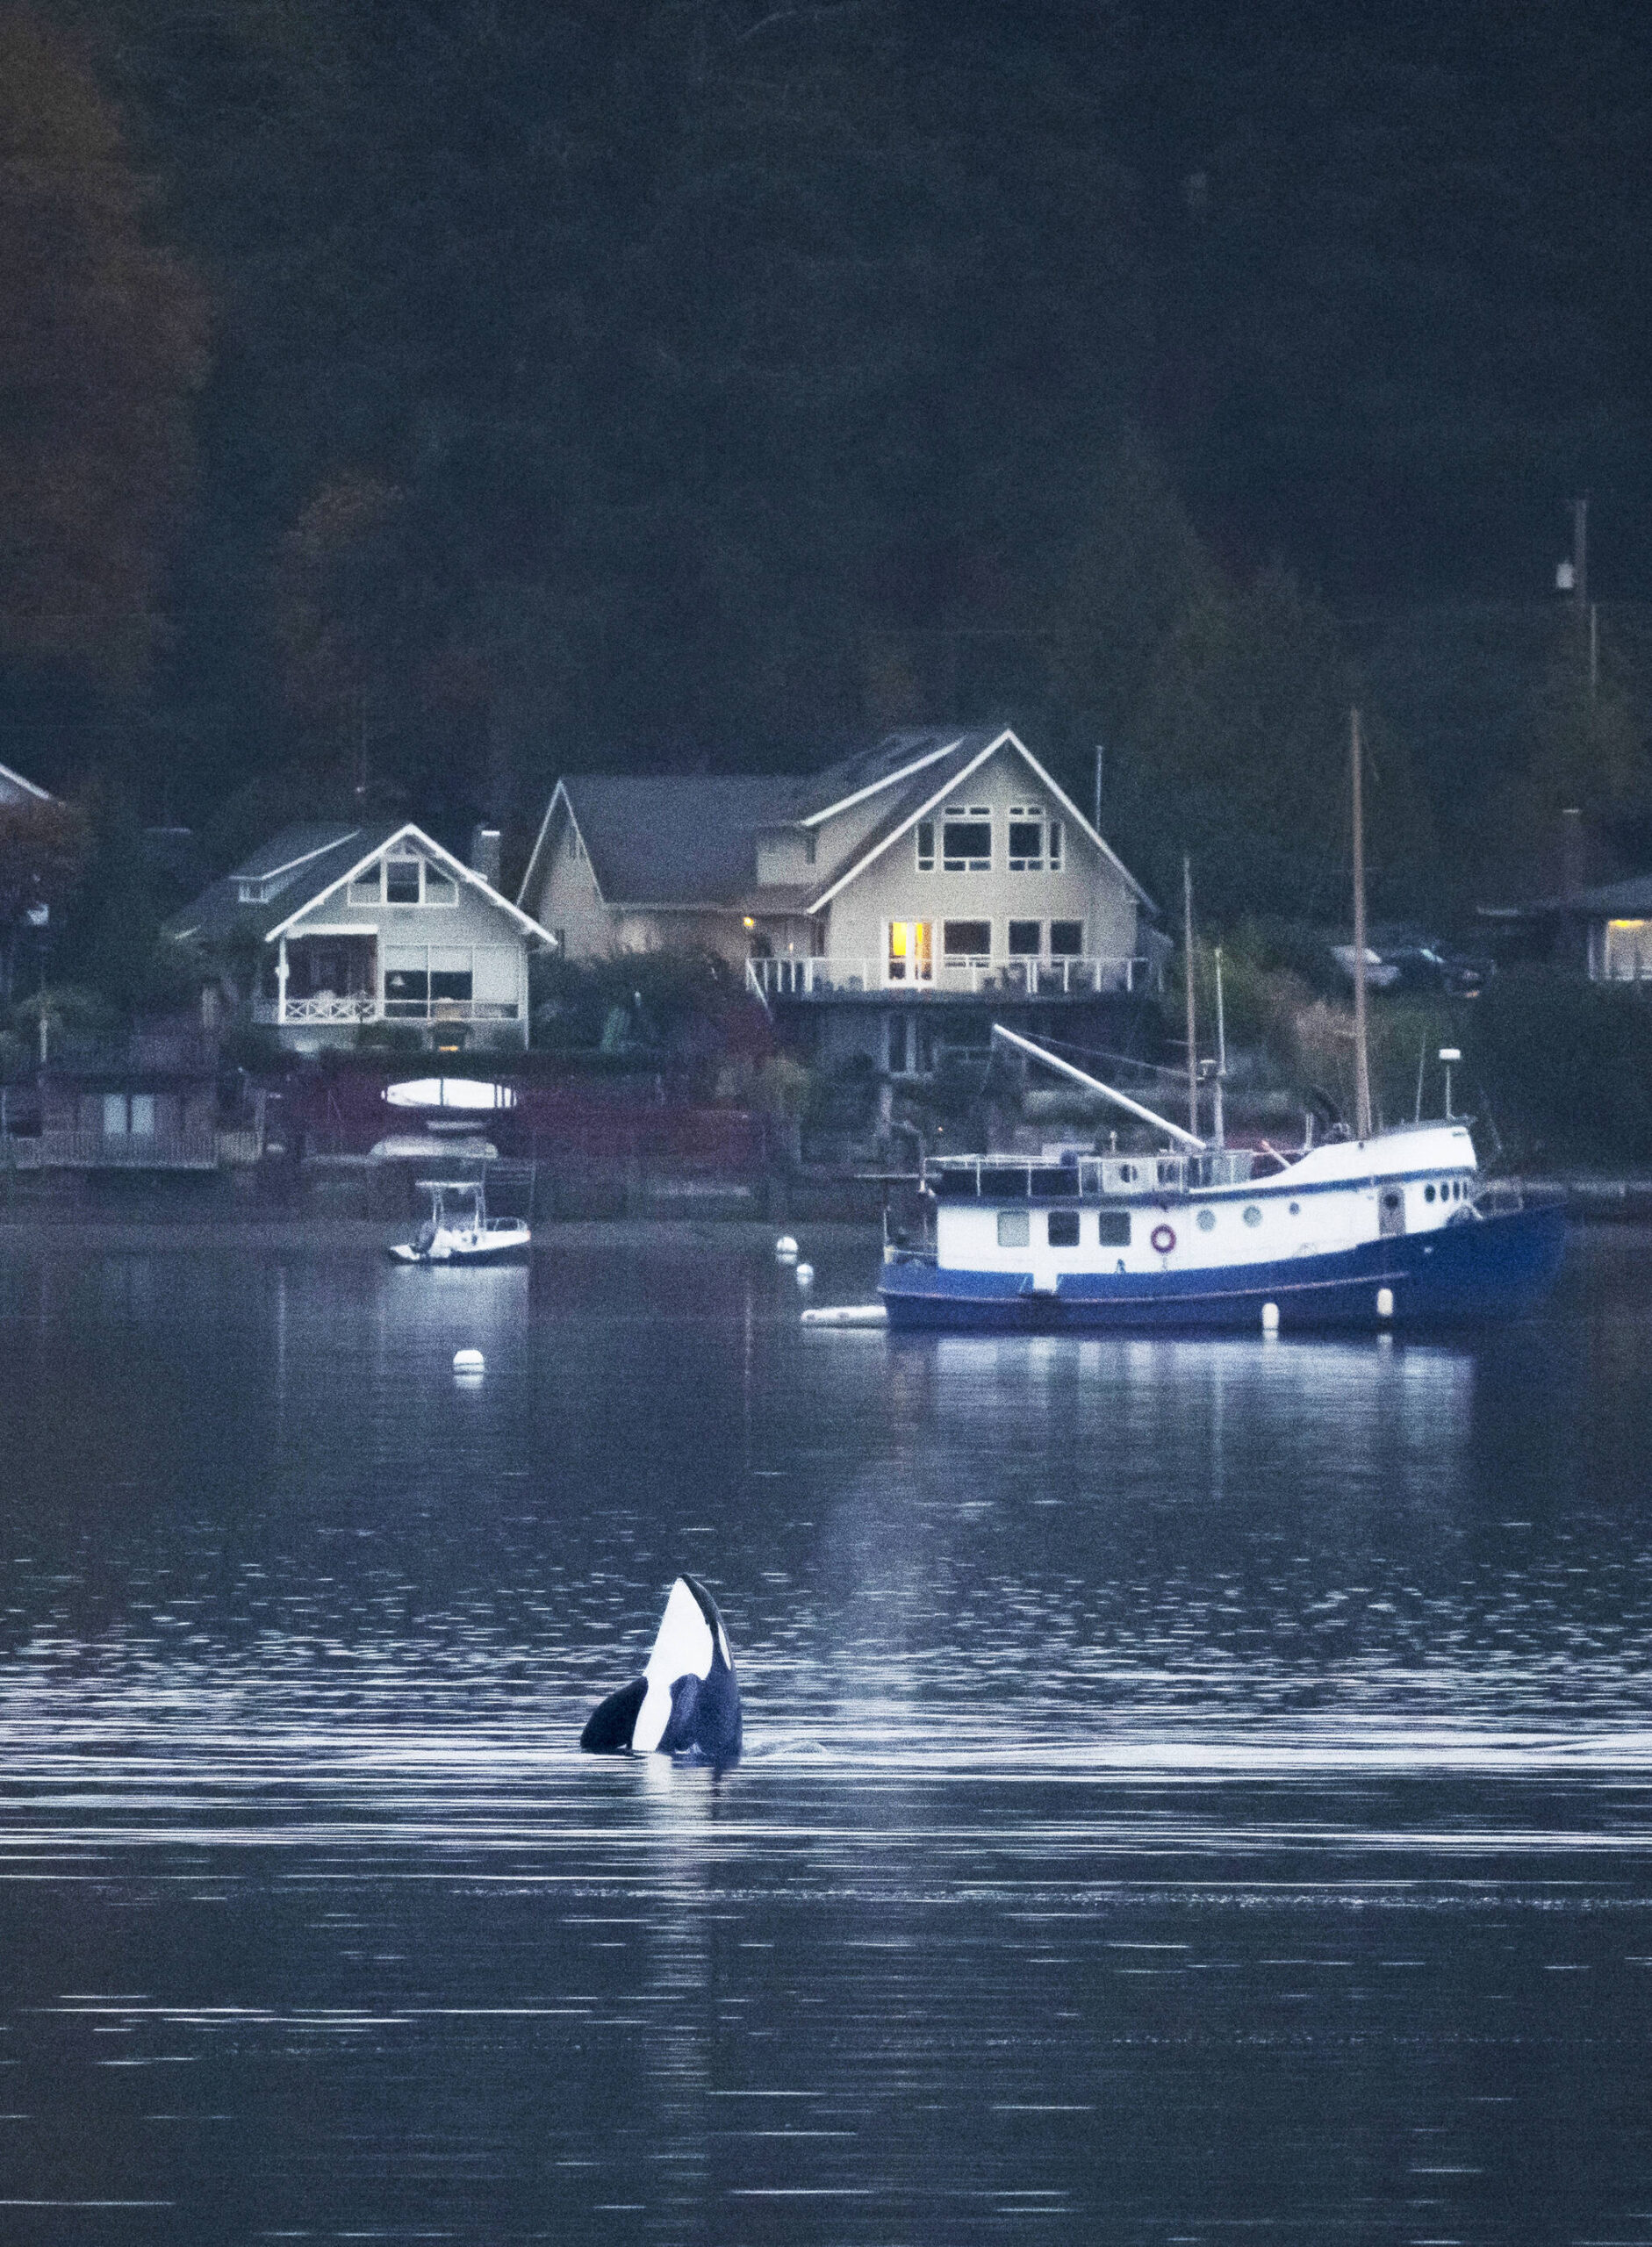 As night fell over Quartermaster Harbor on Sunday, an orca spy-hopped out of the water. This photograph was taken at the end of Kingsbury Road, looking across the inner harbor to the west towards Burton. (John Decker Photo).